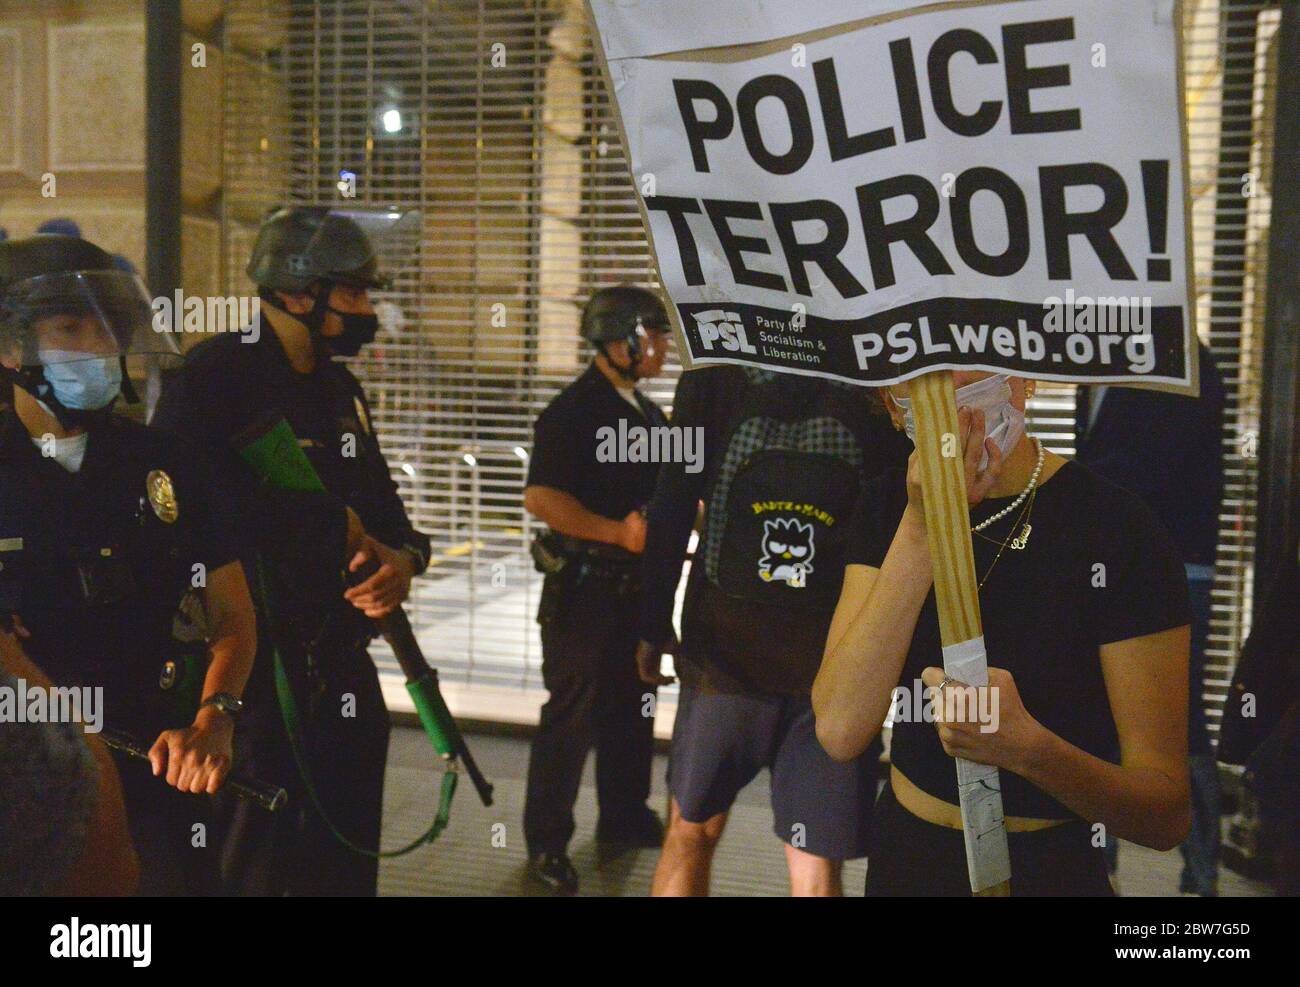 Los Angeles, United States. 29th May, 2020. Protesters demonstrating against the the killing of George Floyd clash for hours with police on the streets of downtown Los Angeles, blocking the 110 Freeway, vandalizing cars and property and getting into a series of tense altercations with officers on Friday, May 29, 2020. At least four LAPD officers were hurt, some after being hit by debris. Multiple arrests were made. By midnight, the situation had deteriorated as several jewelry stores were broken into and looted along with a CVS drug store. Photo by Jim Ruymen/UPI Credit: UPI/Alamy Live News Stock Photo